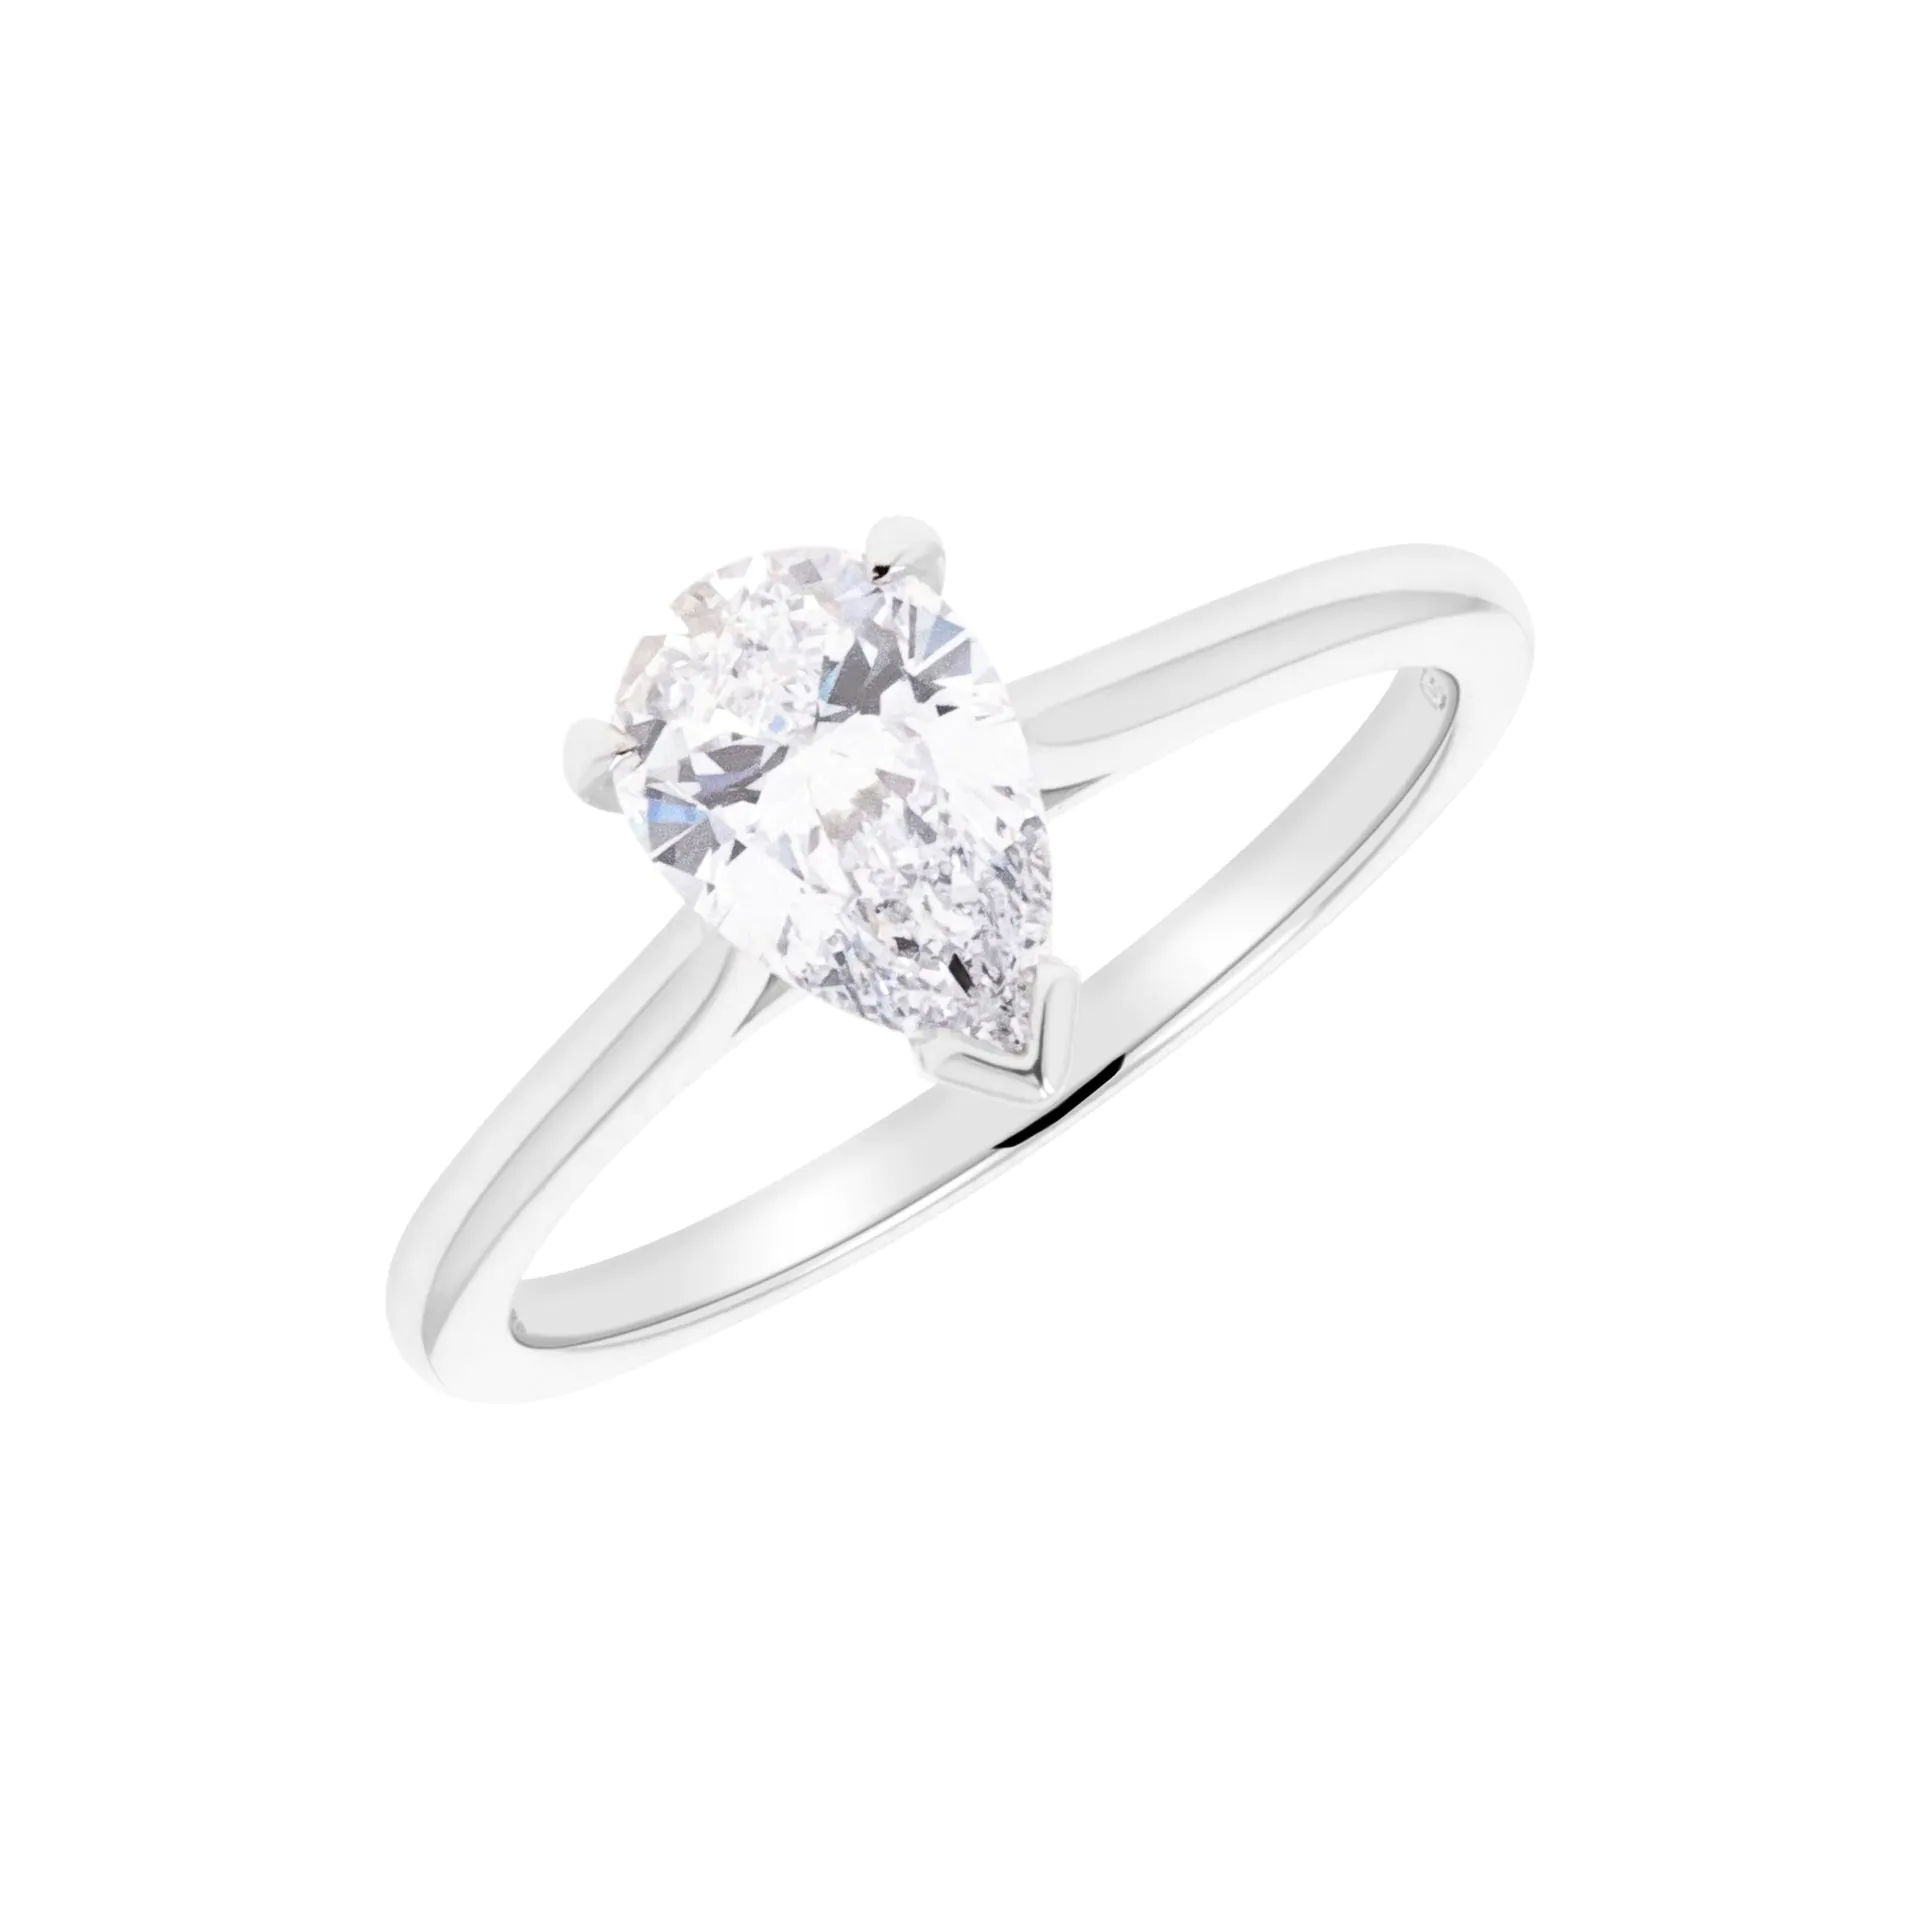 Wendy Platinum 1.00ct Pear Cut Diamond Solitaire Ring